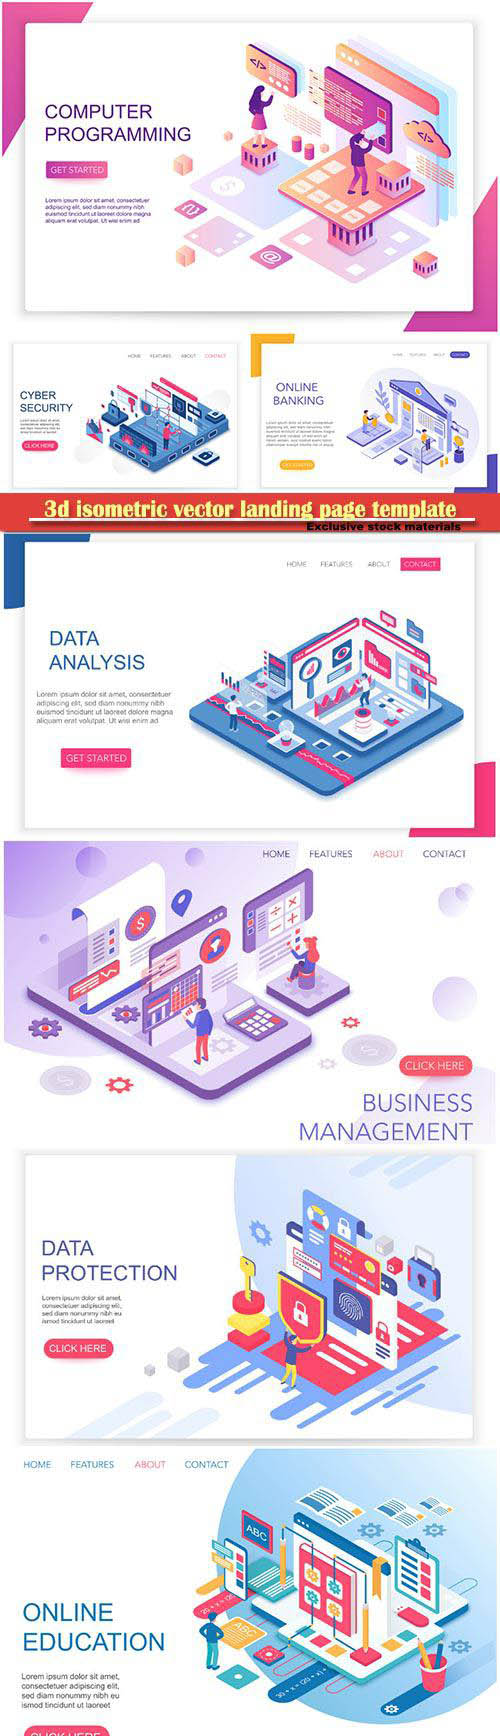 3d isometric vector landing page template